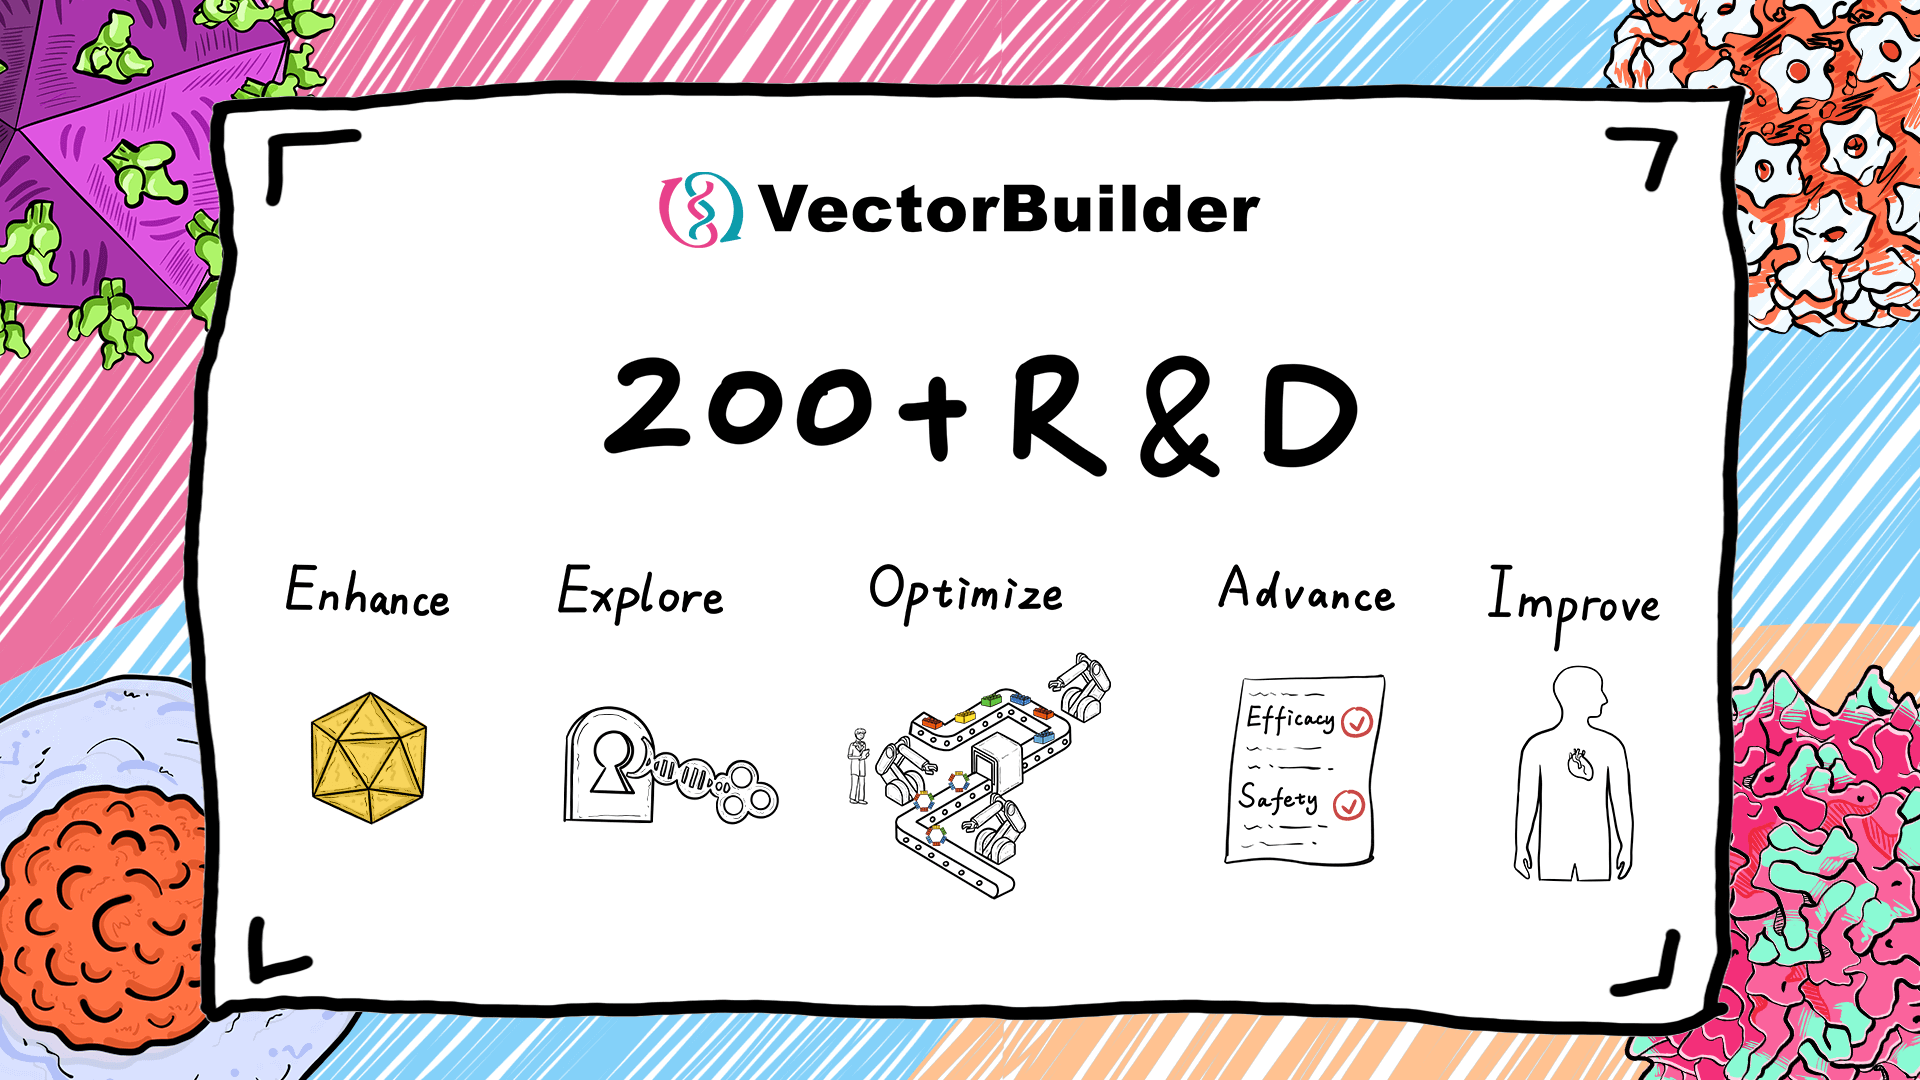 We are Visionary_VectorBuilder